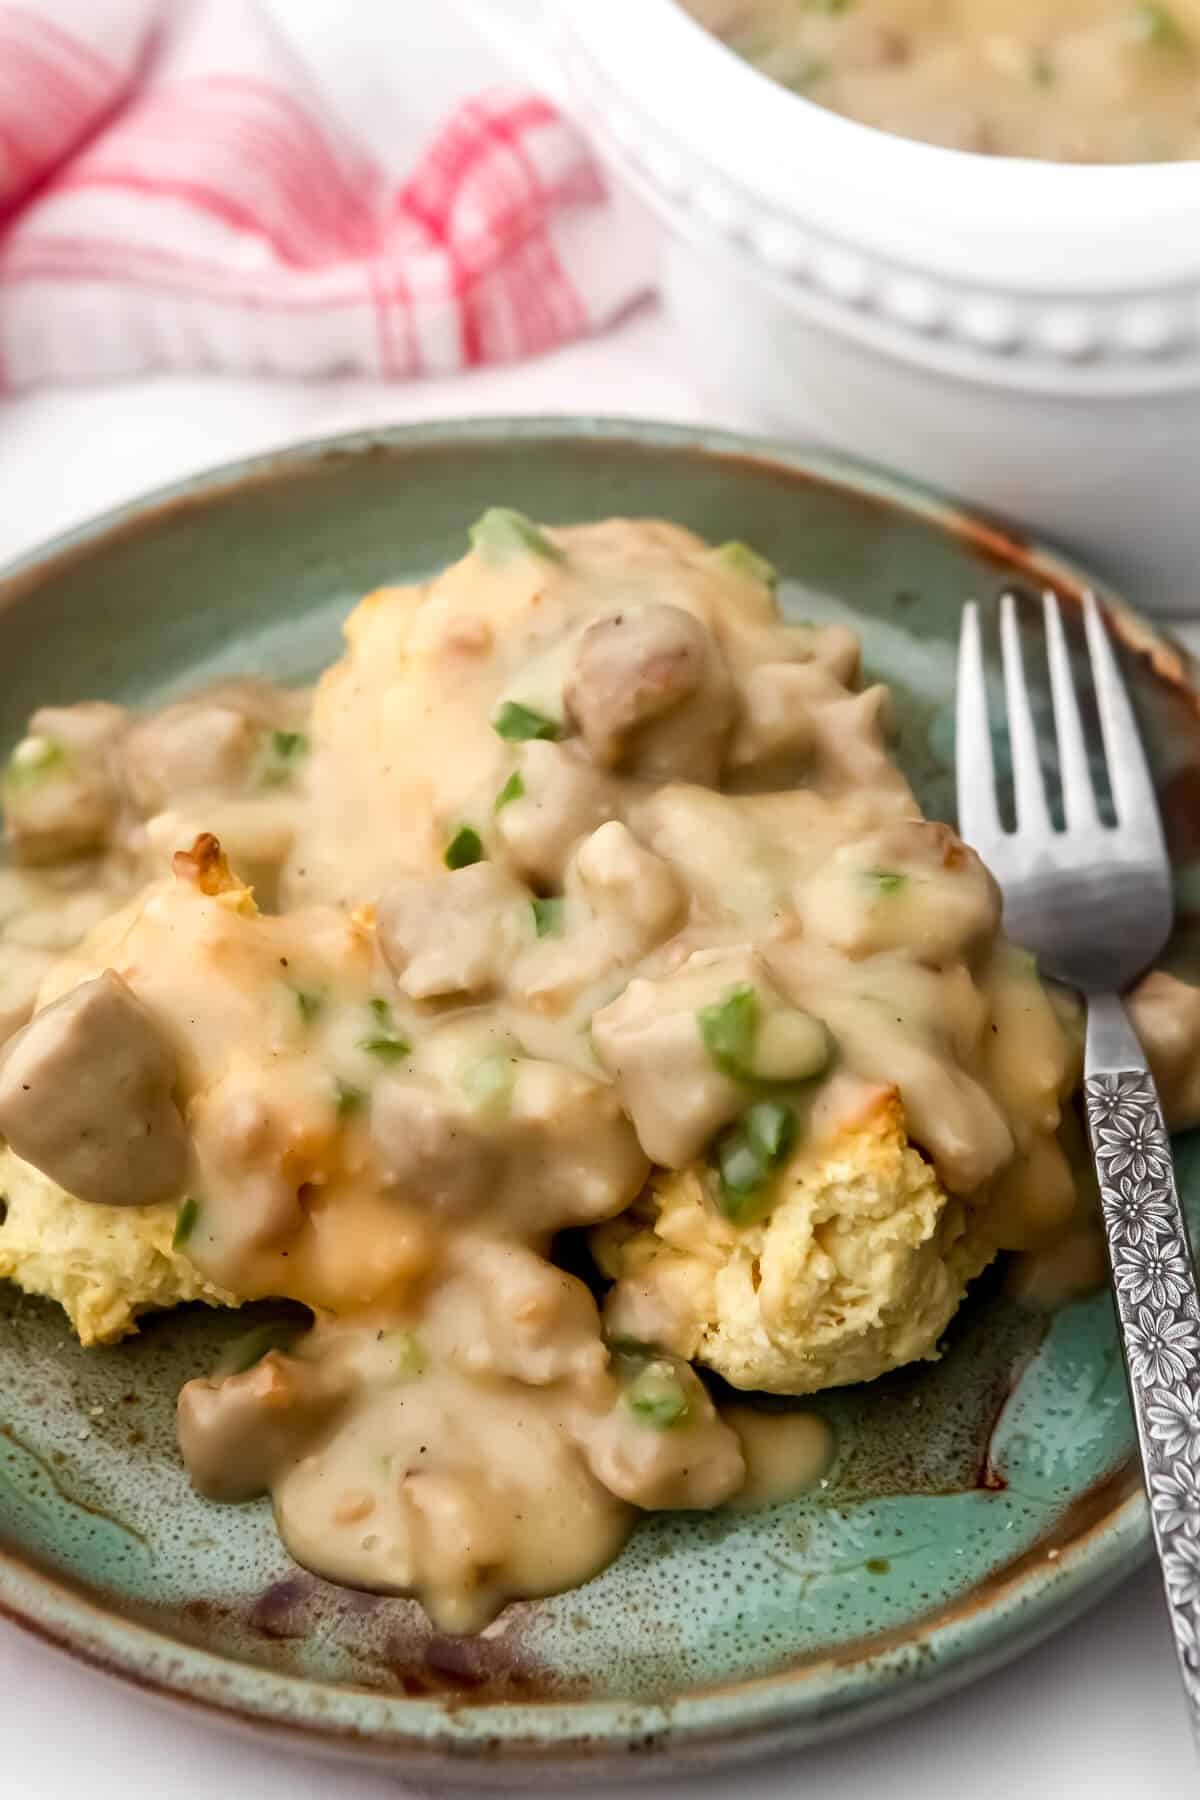 Vegan biscuits and gravy with extra gravy on the side.